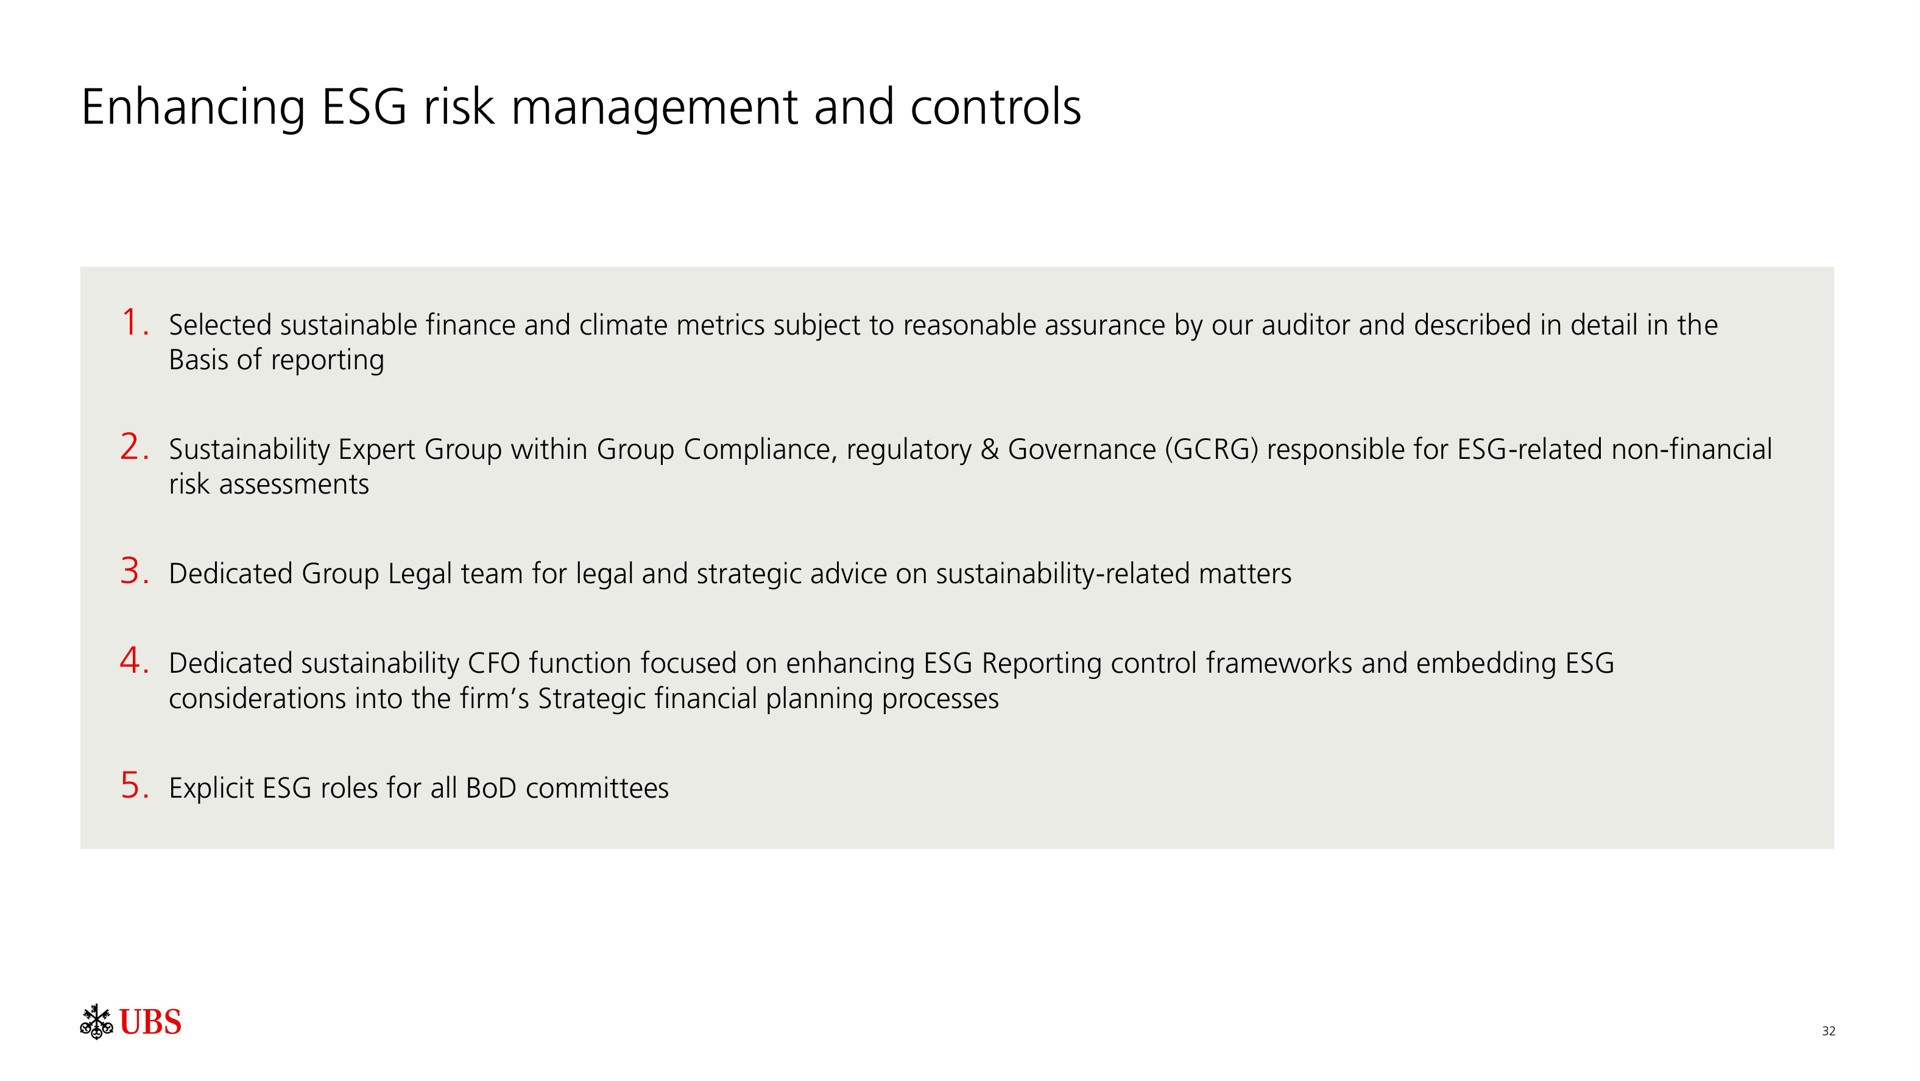 enhancing risk management and controls explicit roles for all bod committees | UBS